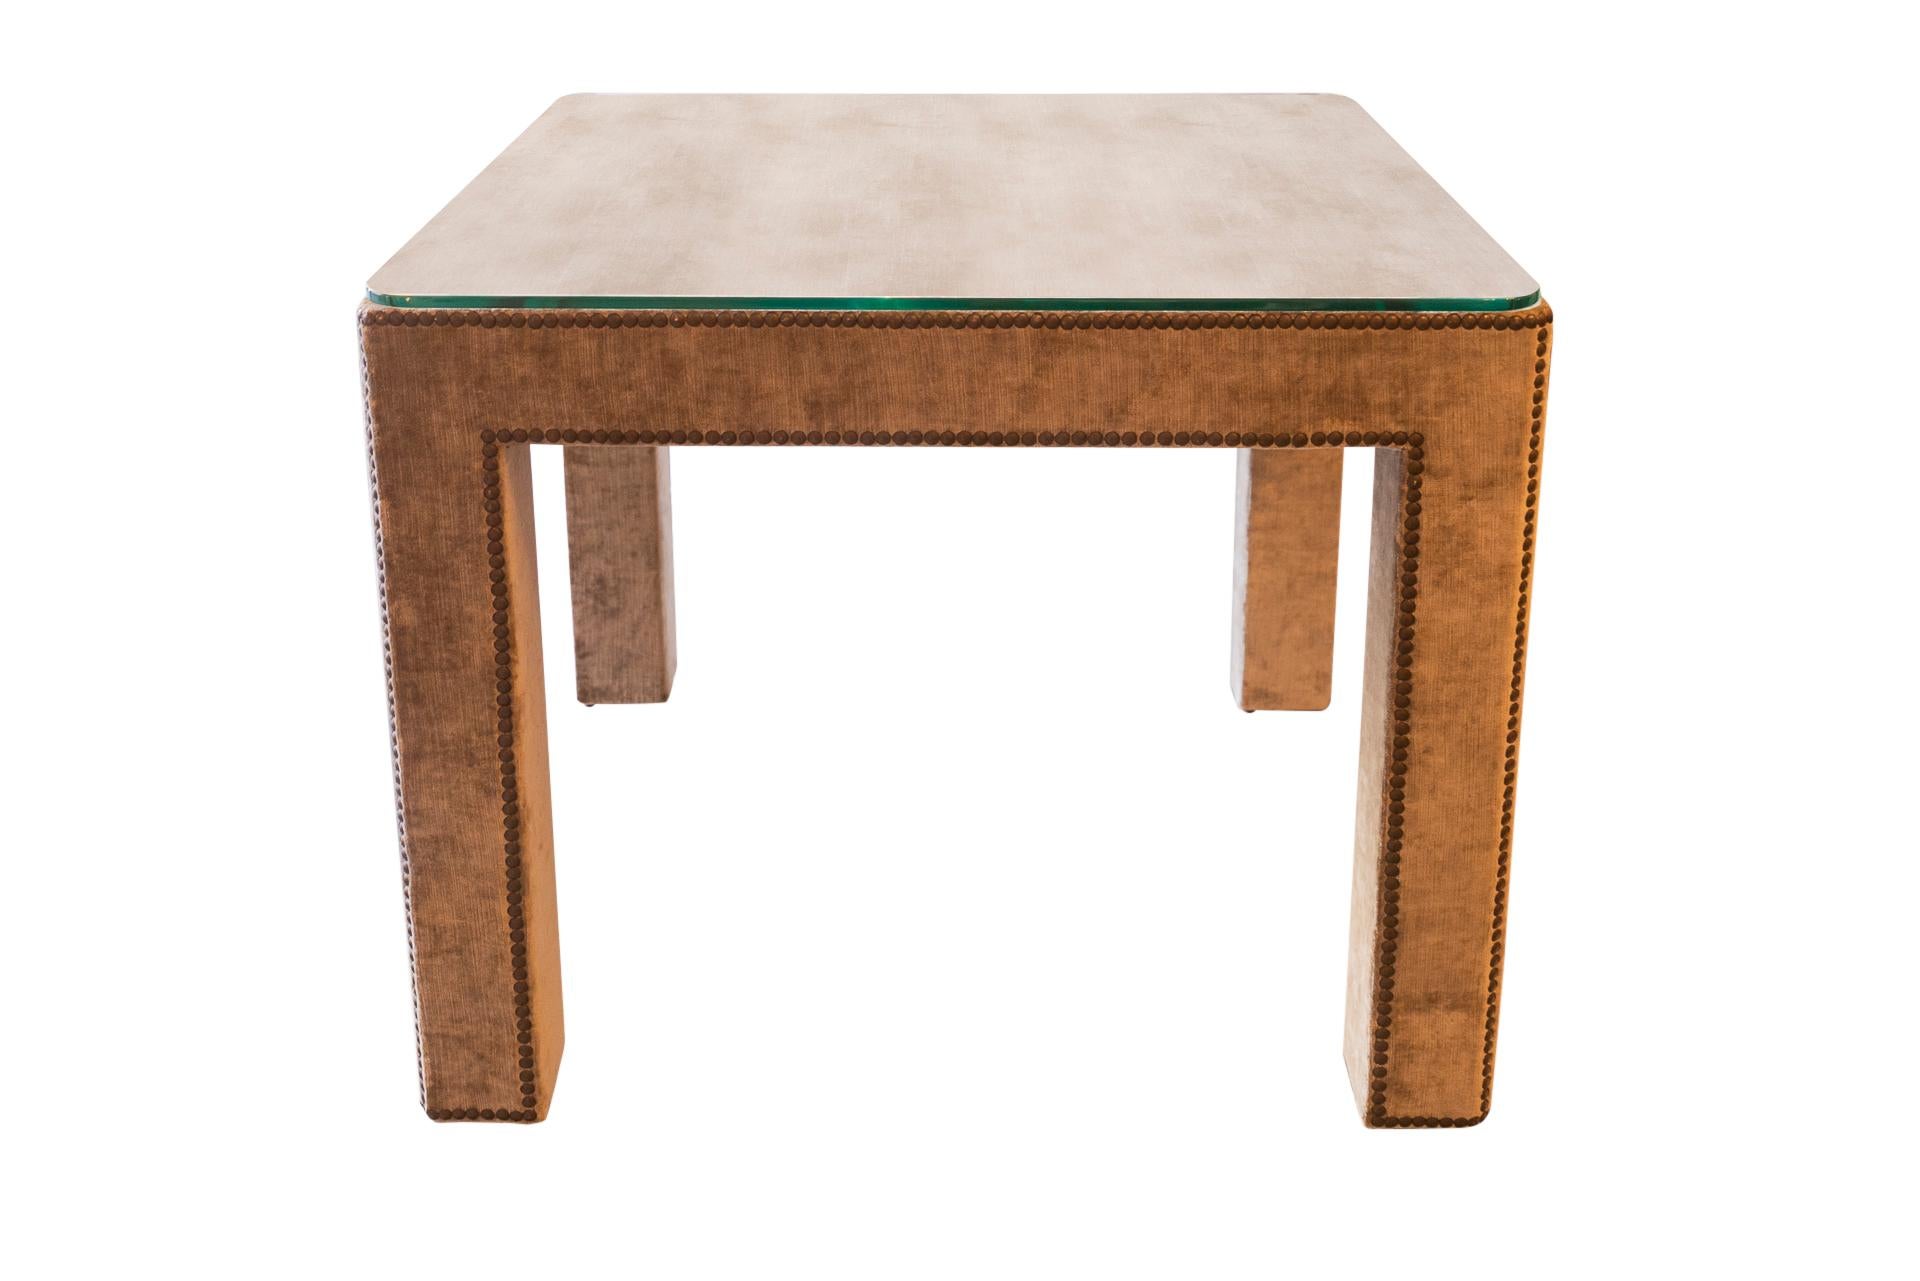 Pair of side tables,
Velvet covered wood, glass tabletop,
France, circa 1970.

Measures: 71 x 71 x 57 cm.